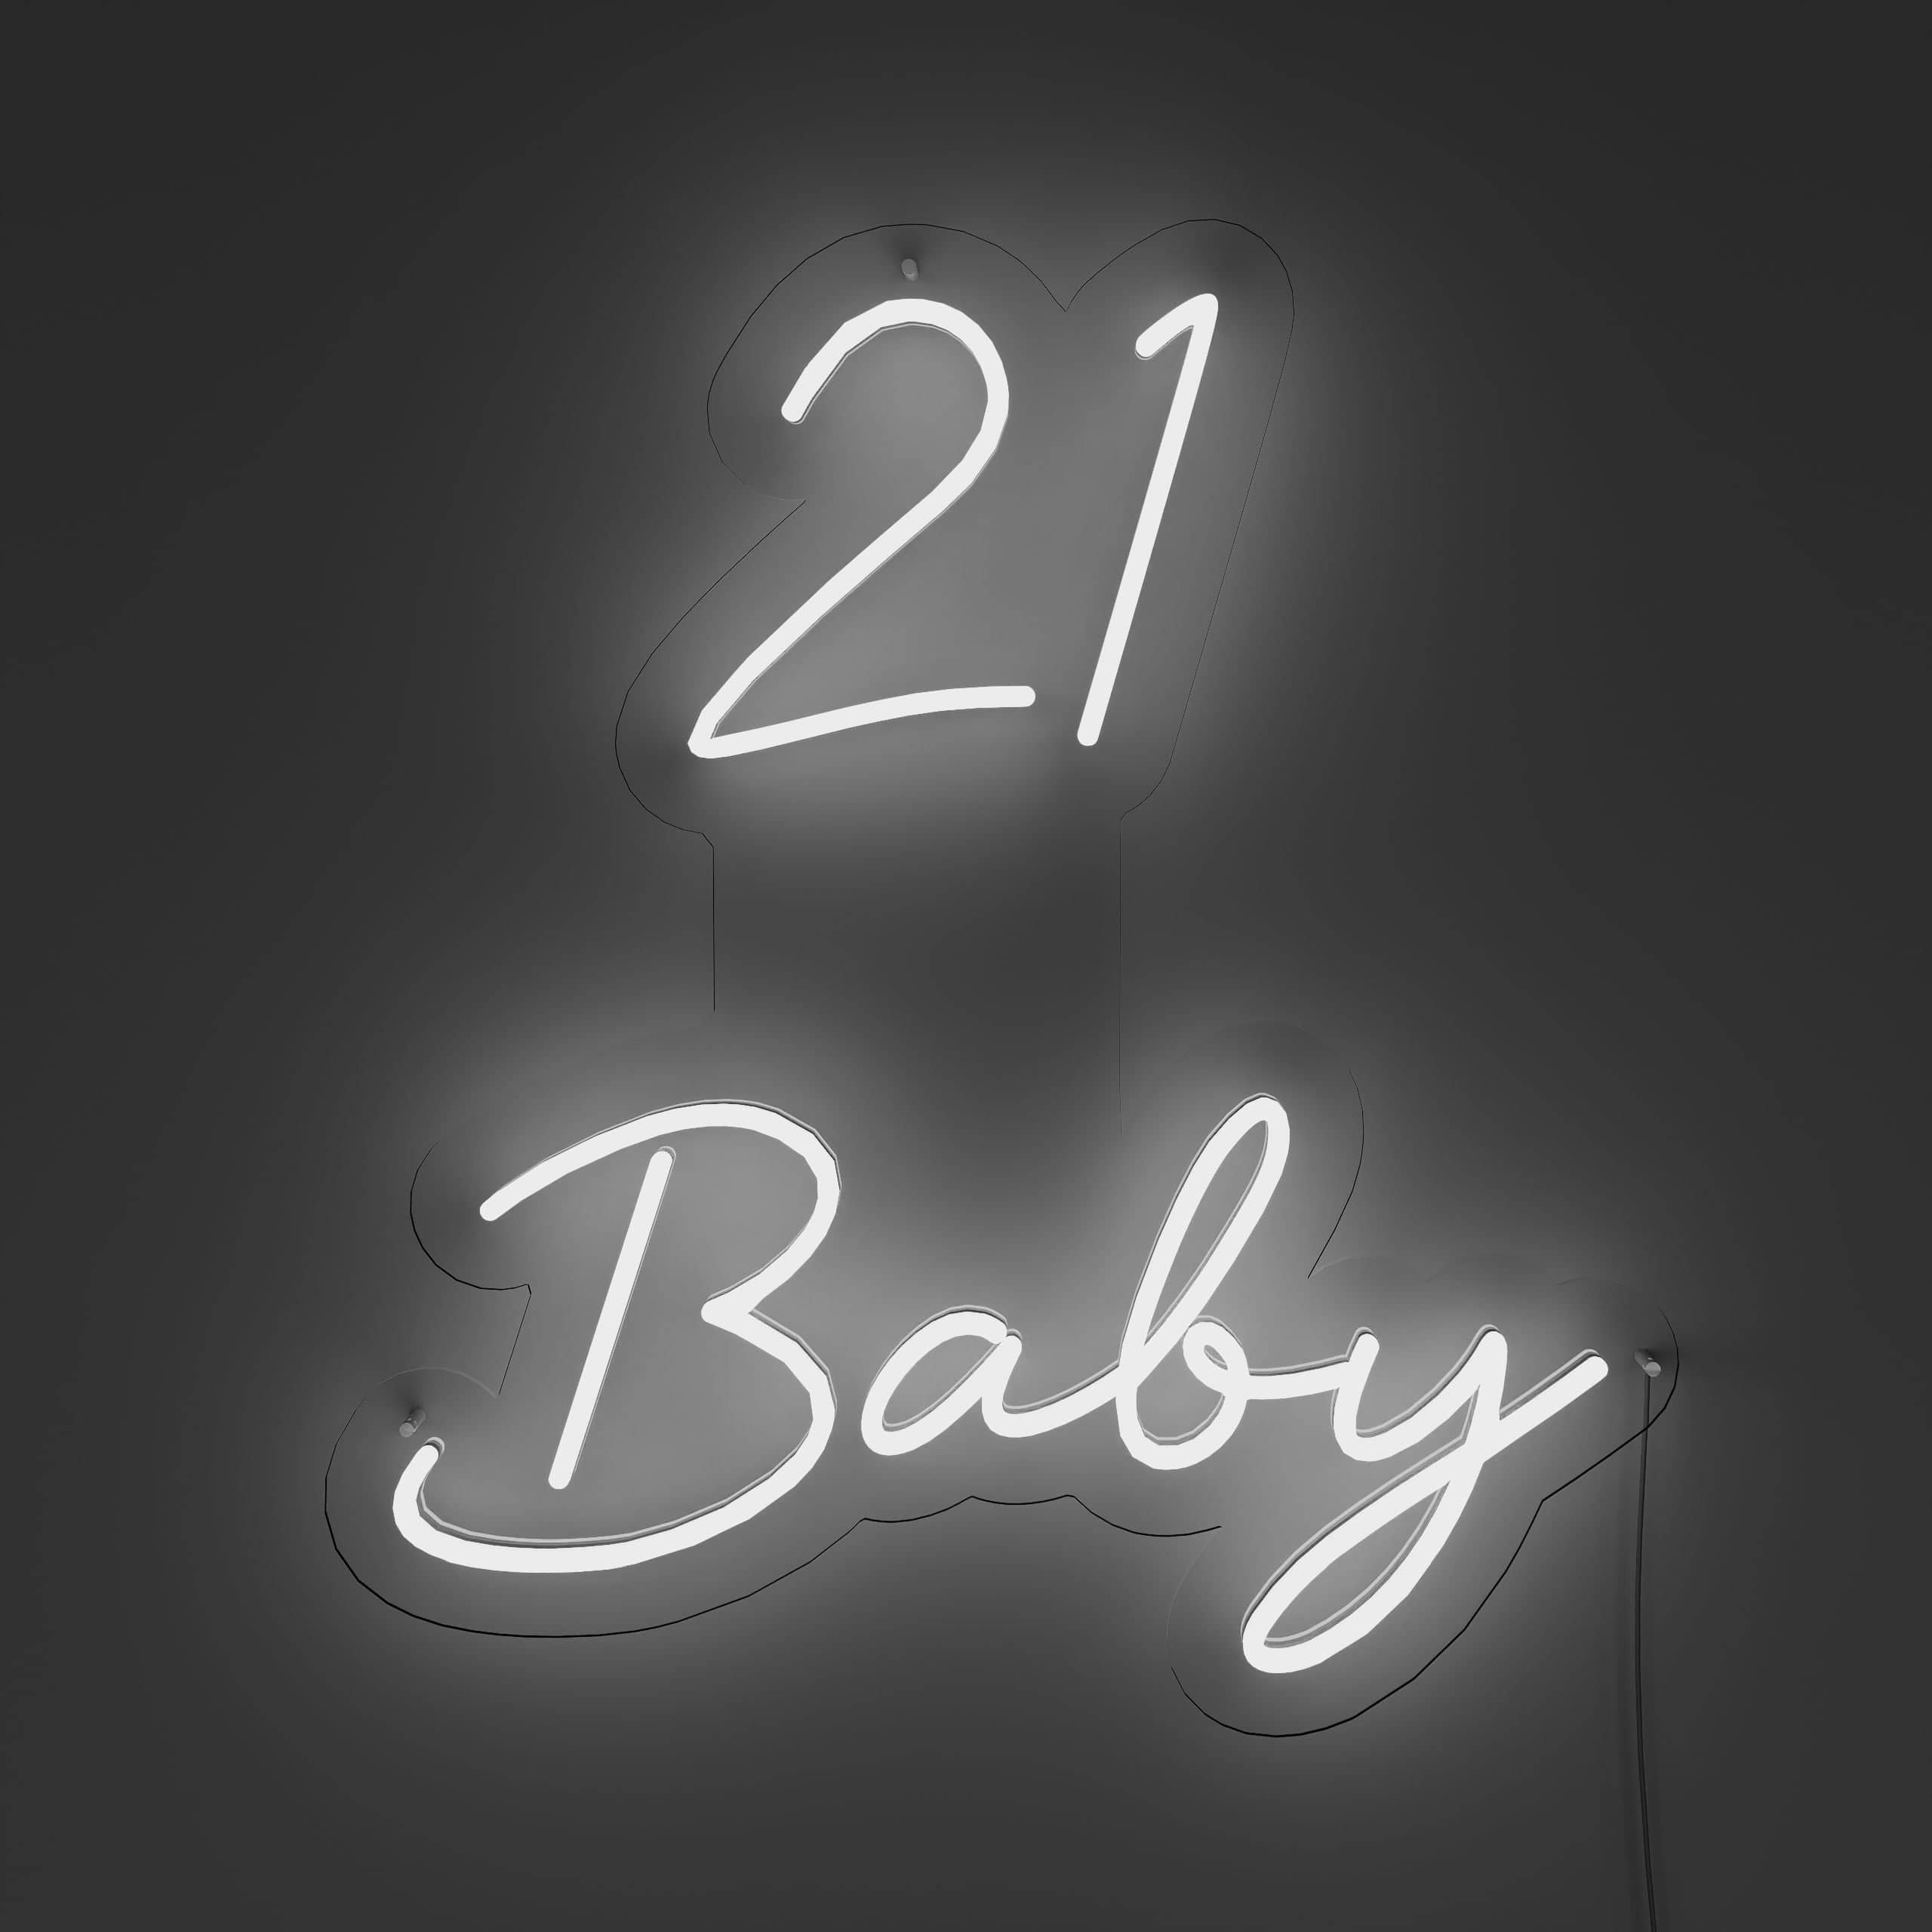 turning-21-with-style-and-excitement!-neon-sign-lite